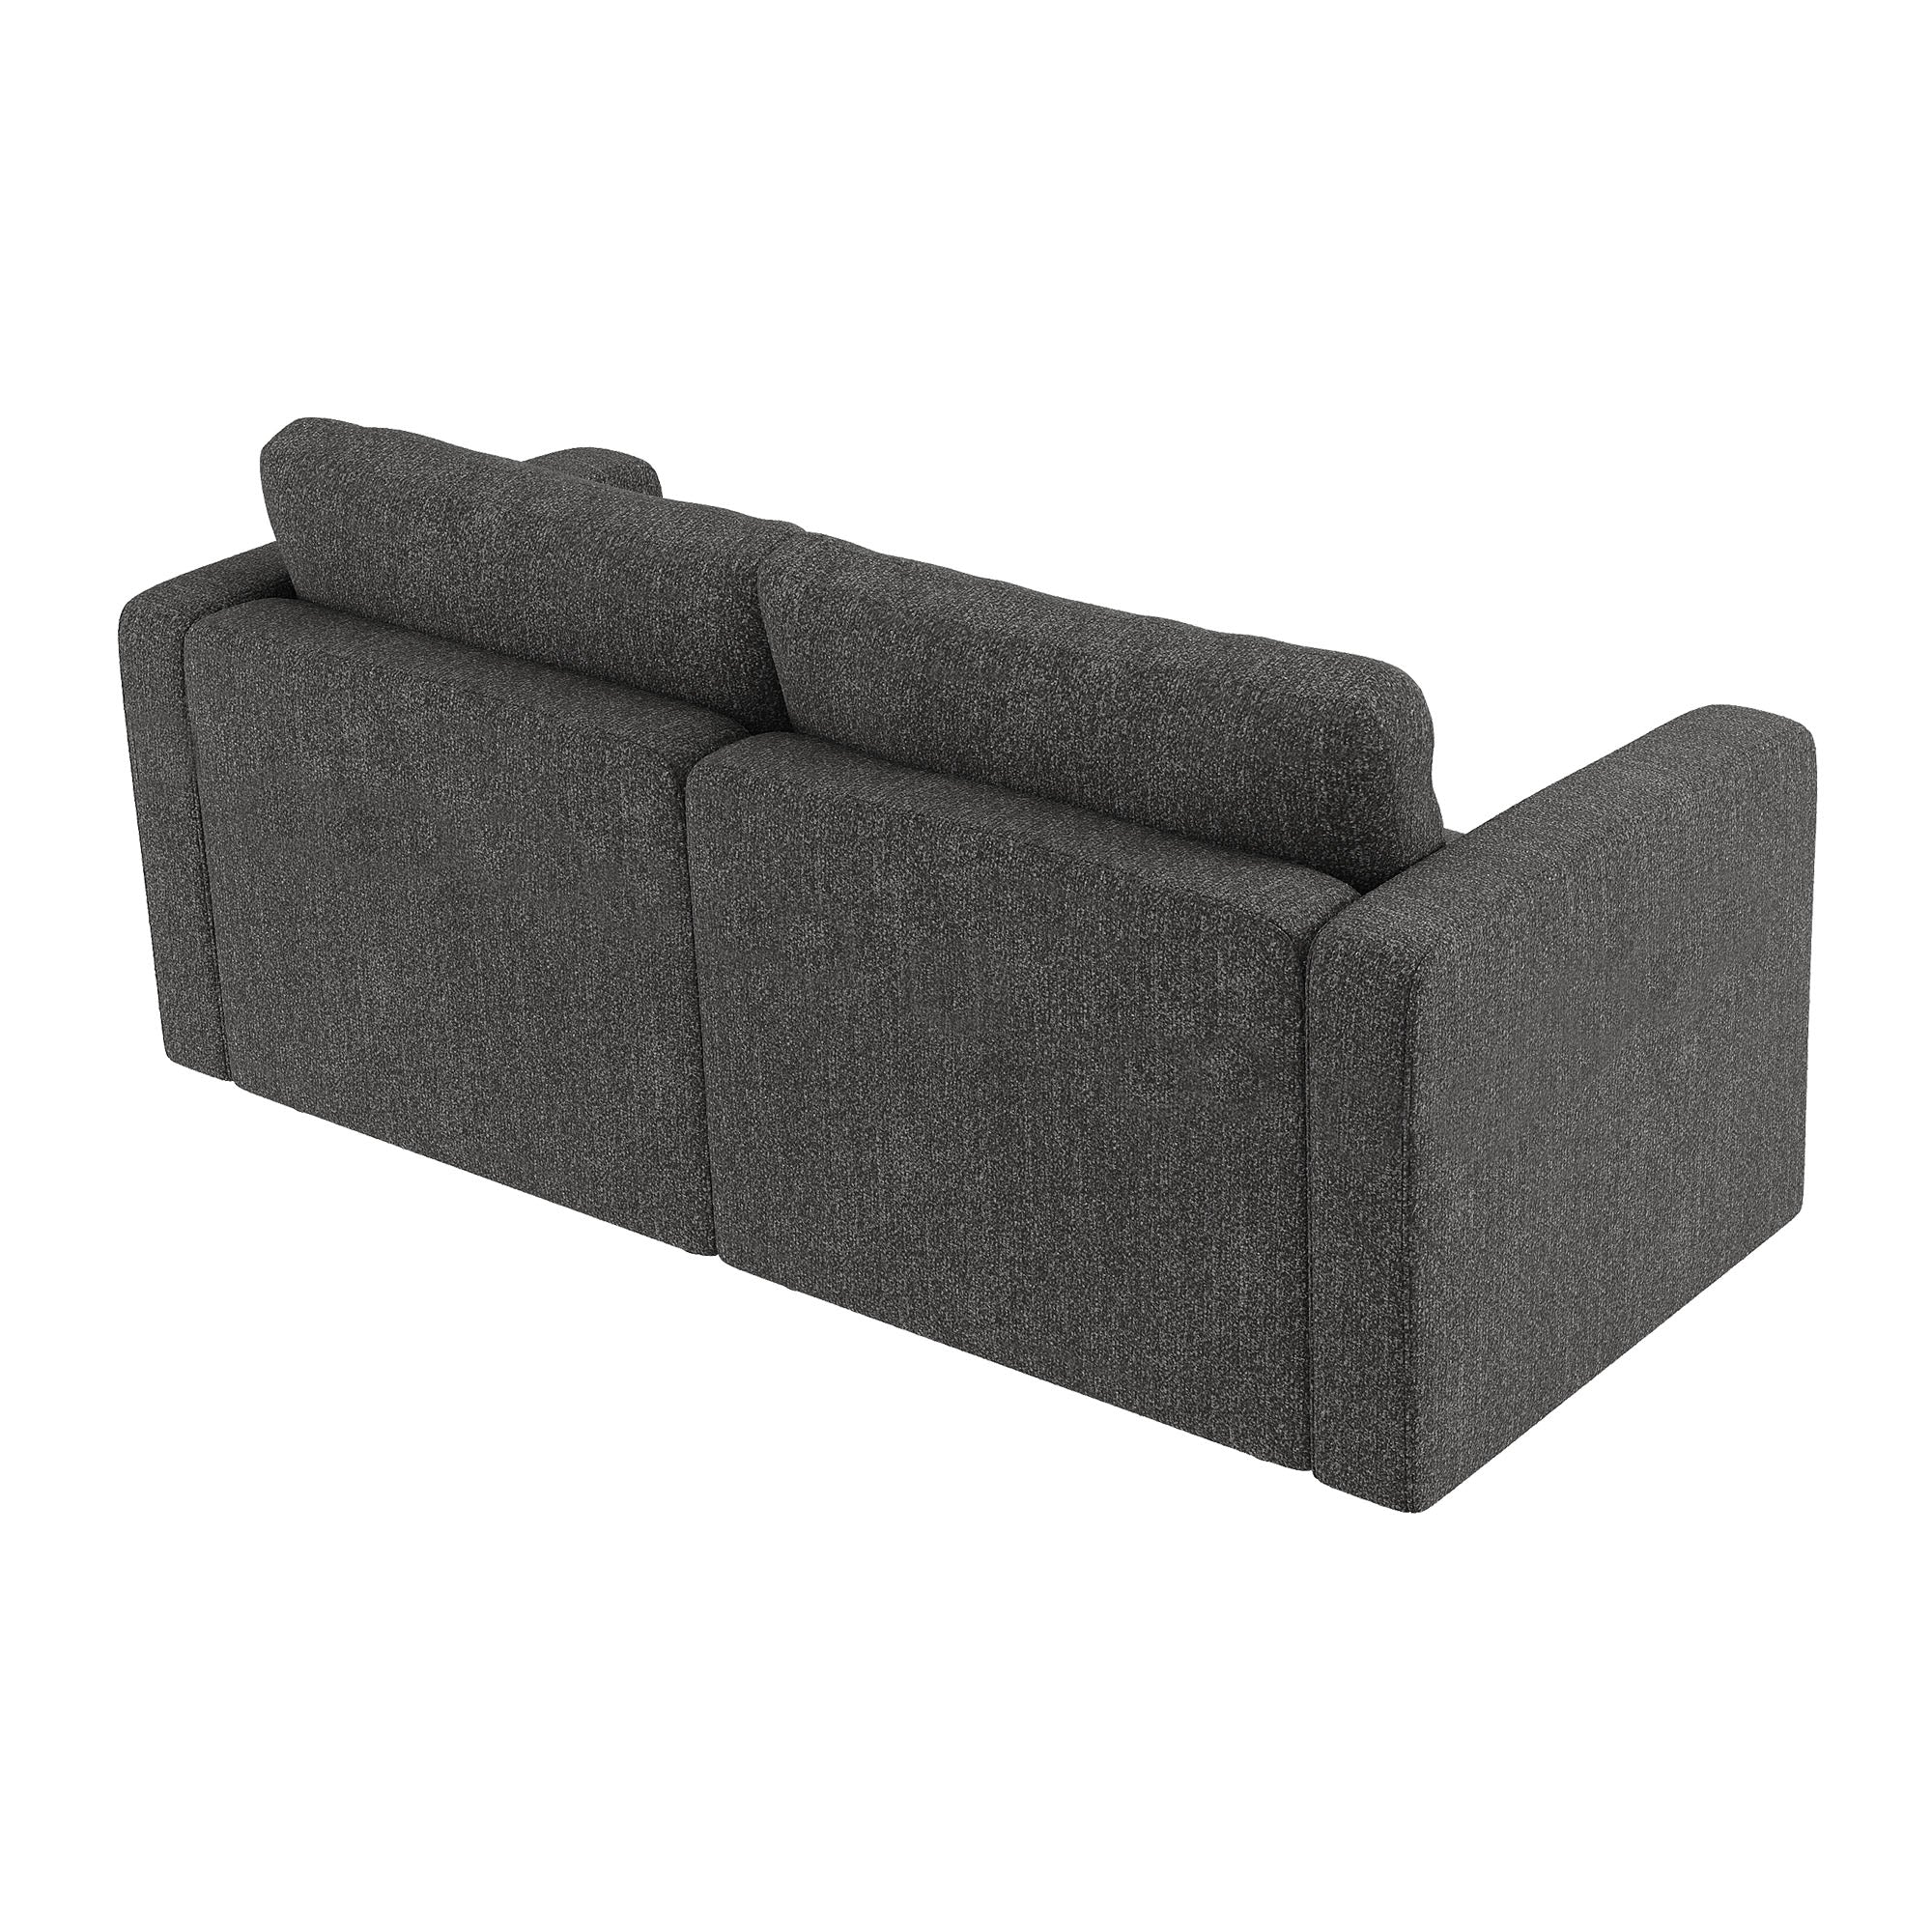 HONBAY 80.4" Wide Fabric Loveseat Sectional Sofa 